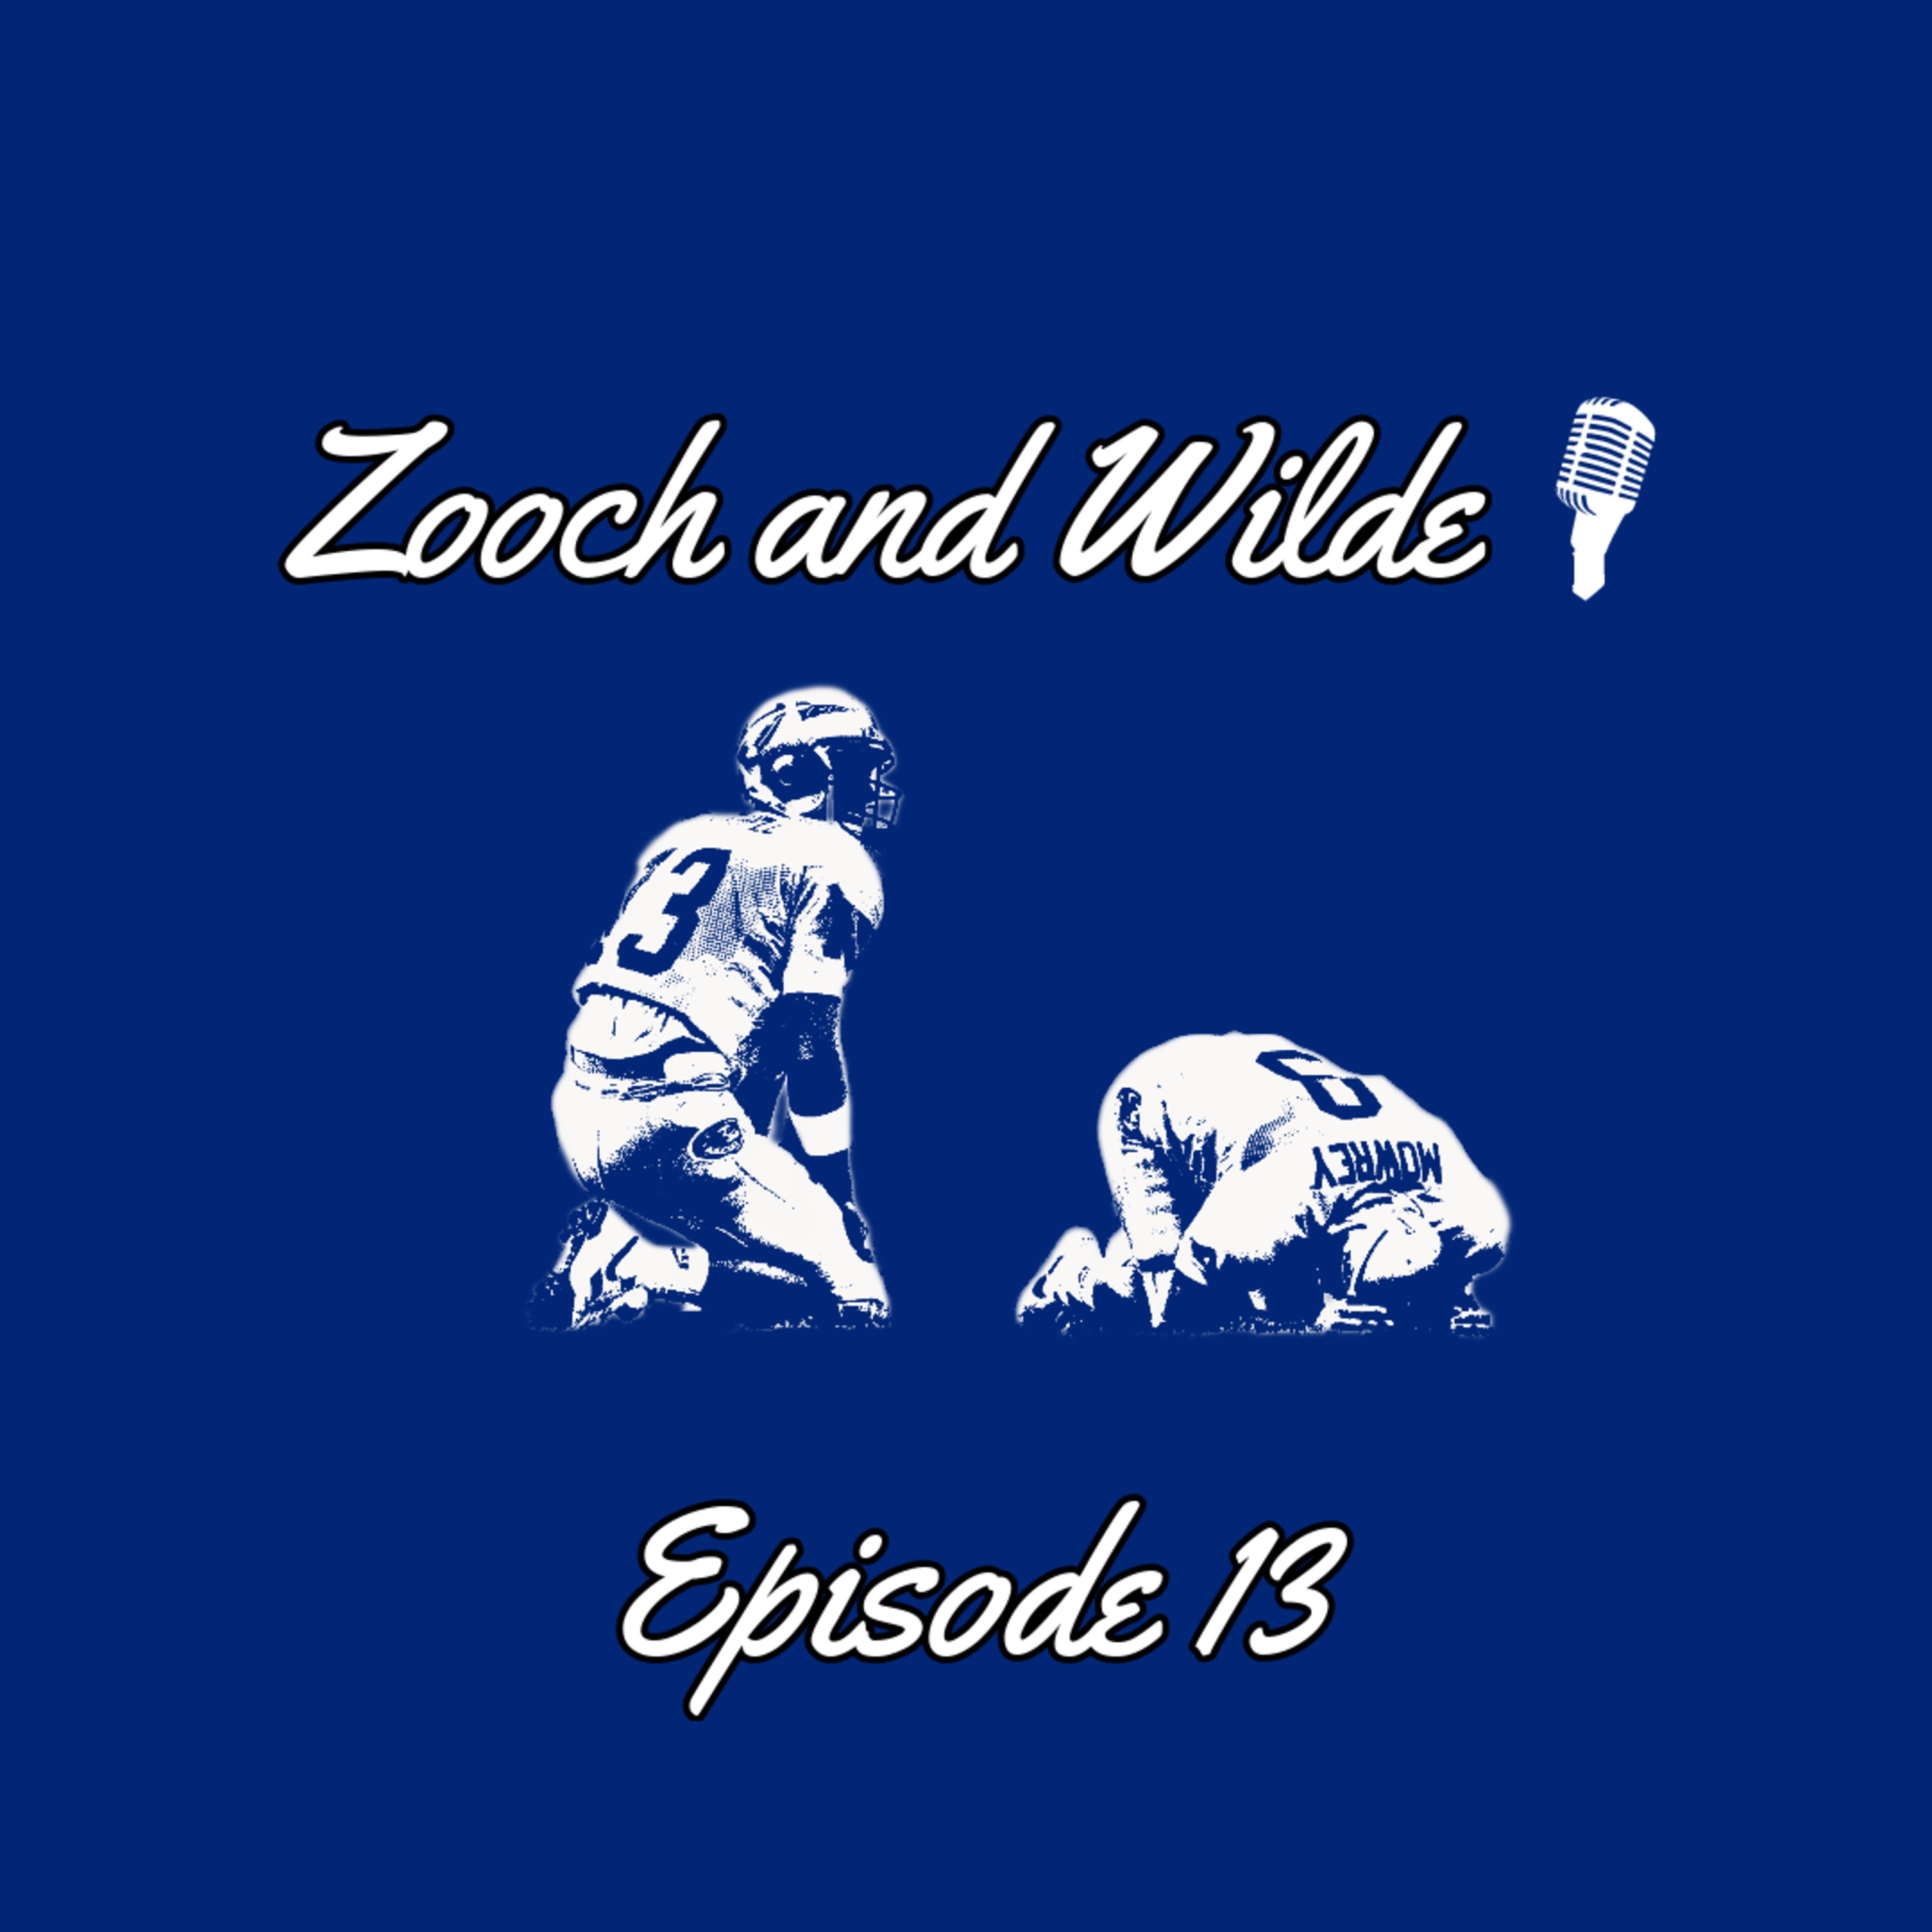 Zooch and Wilde Ep. 13: Commotion with Coaches